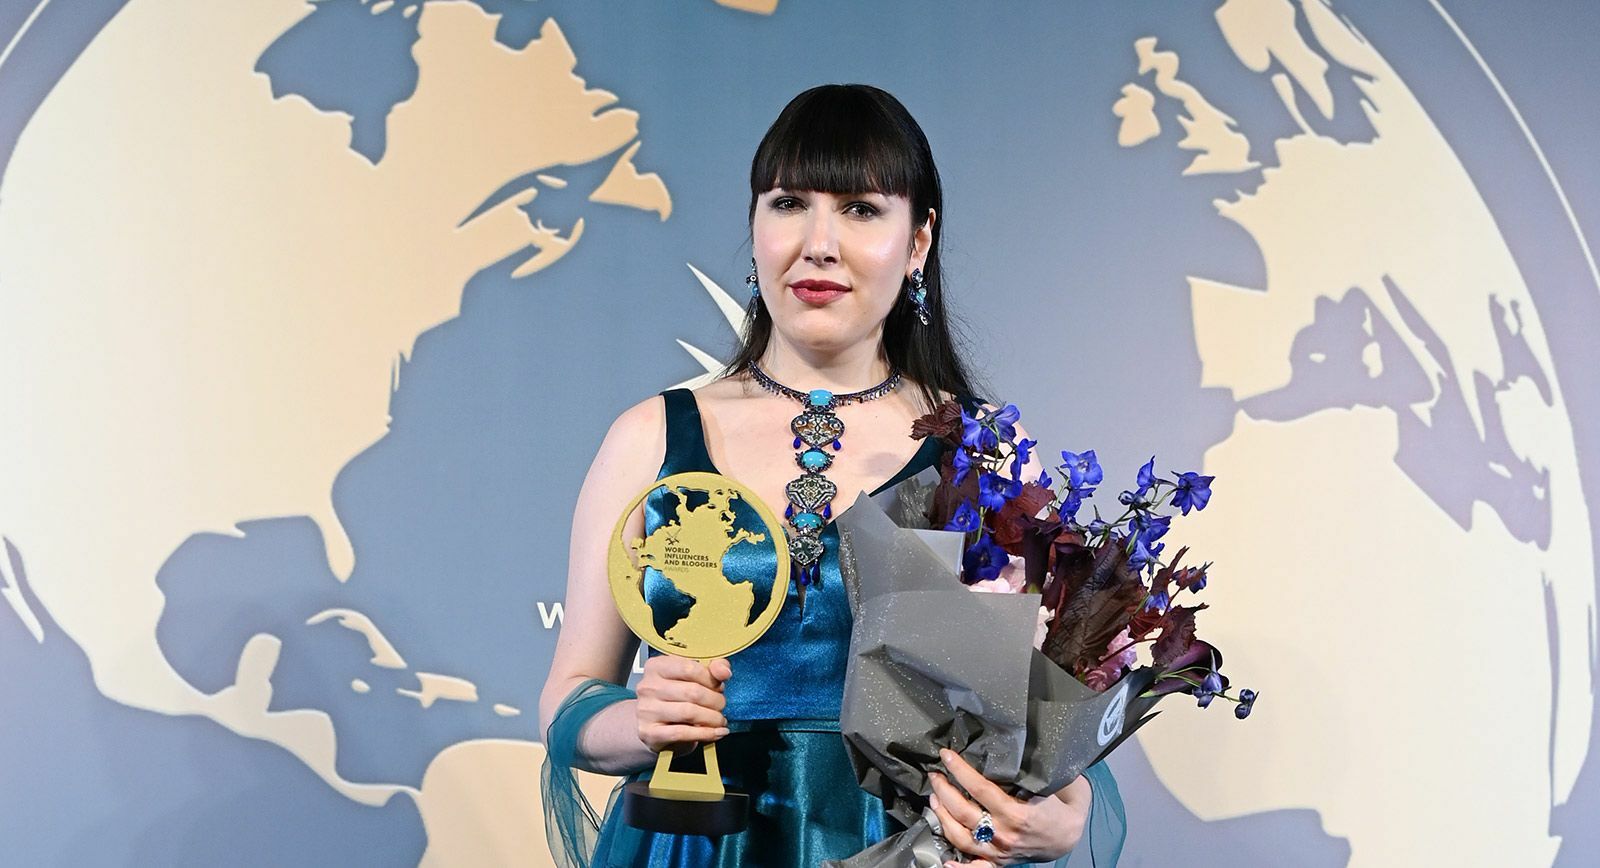 Katerina Perez wins the Jewellery Influencer Award at the World Influencers and Bloggers Association (WIBA) event in 2021